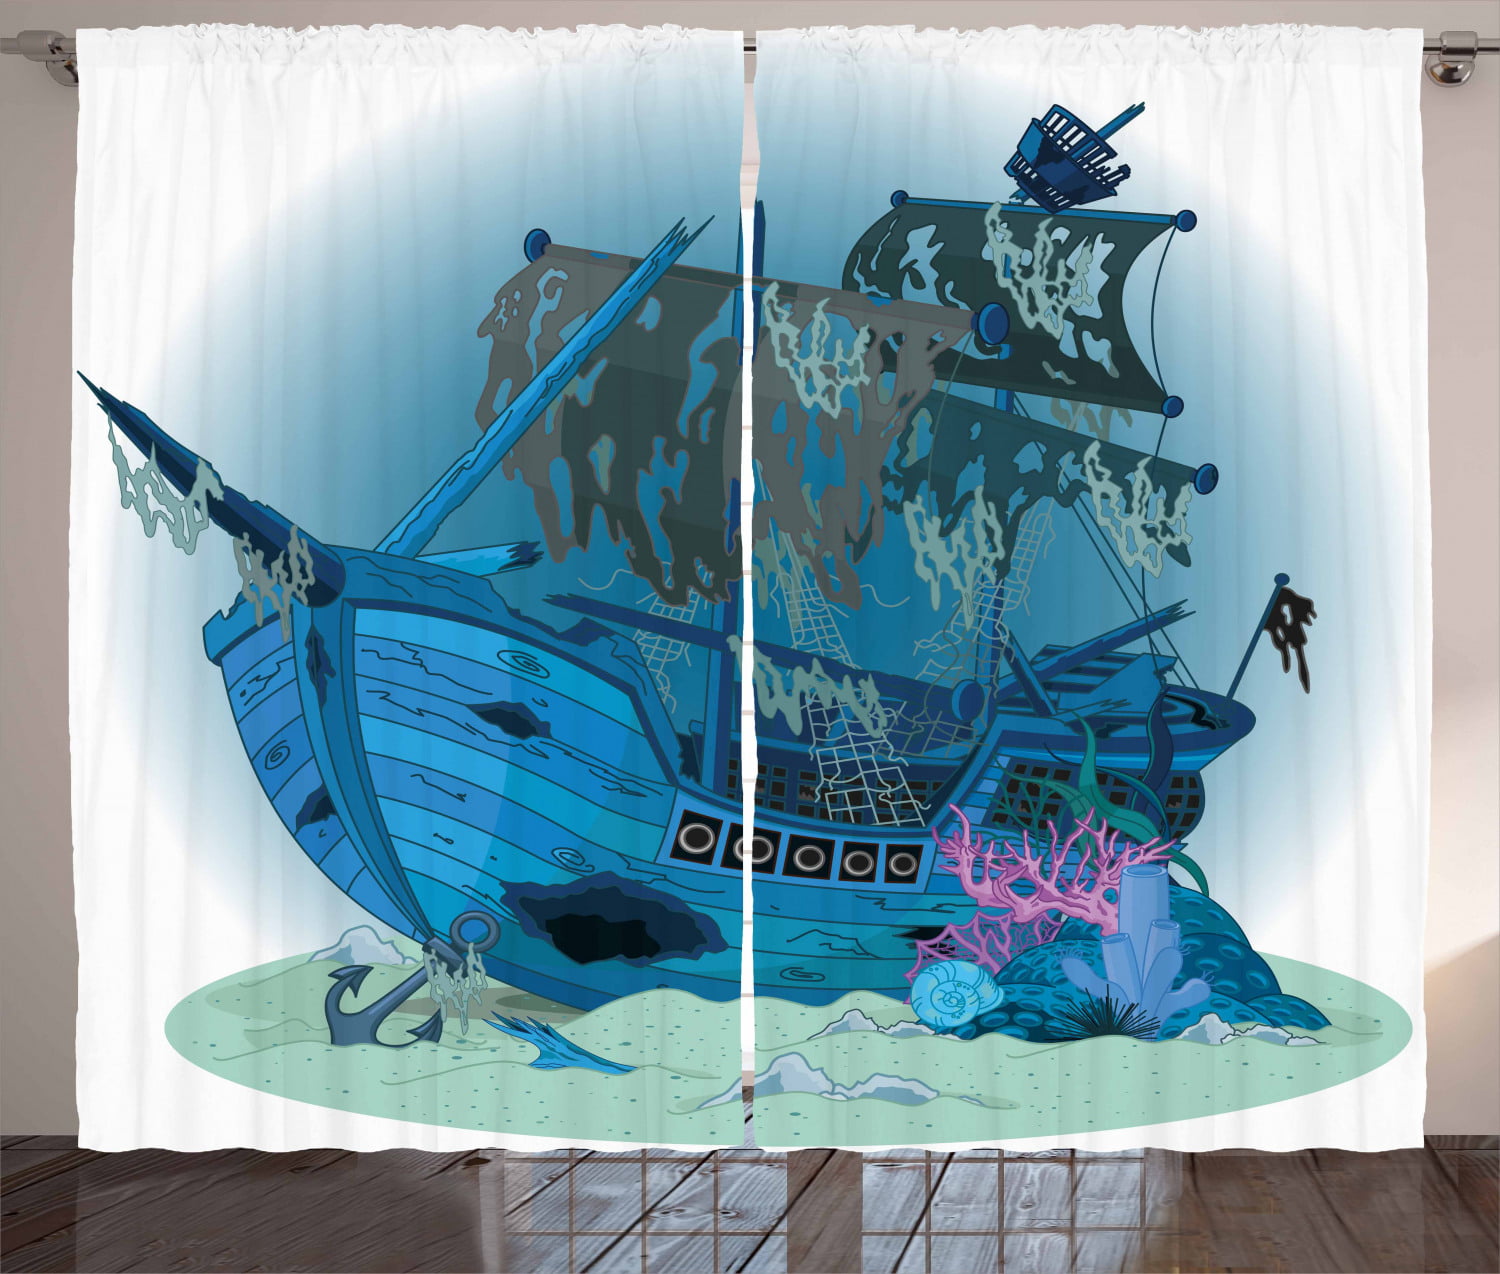 2 Panel Mural Blockout Darking Window Curtain Drapes Pirate Ship In The Night 